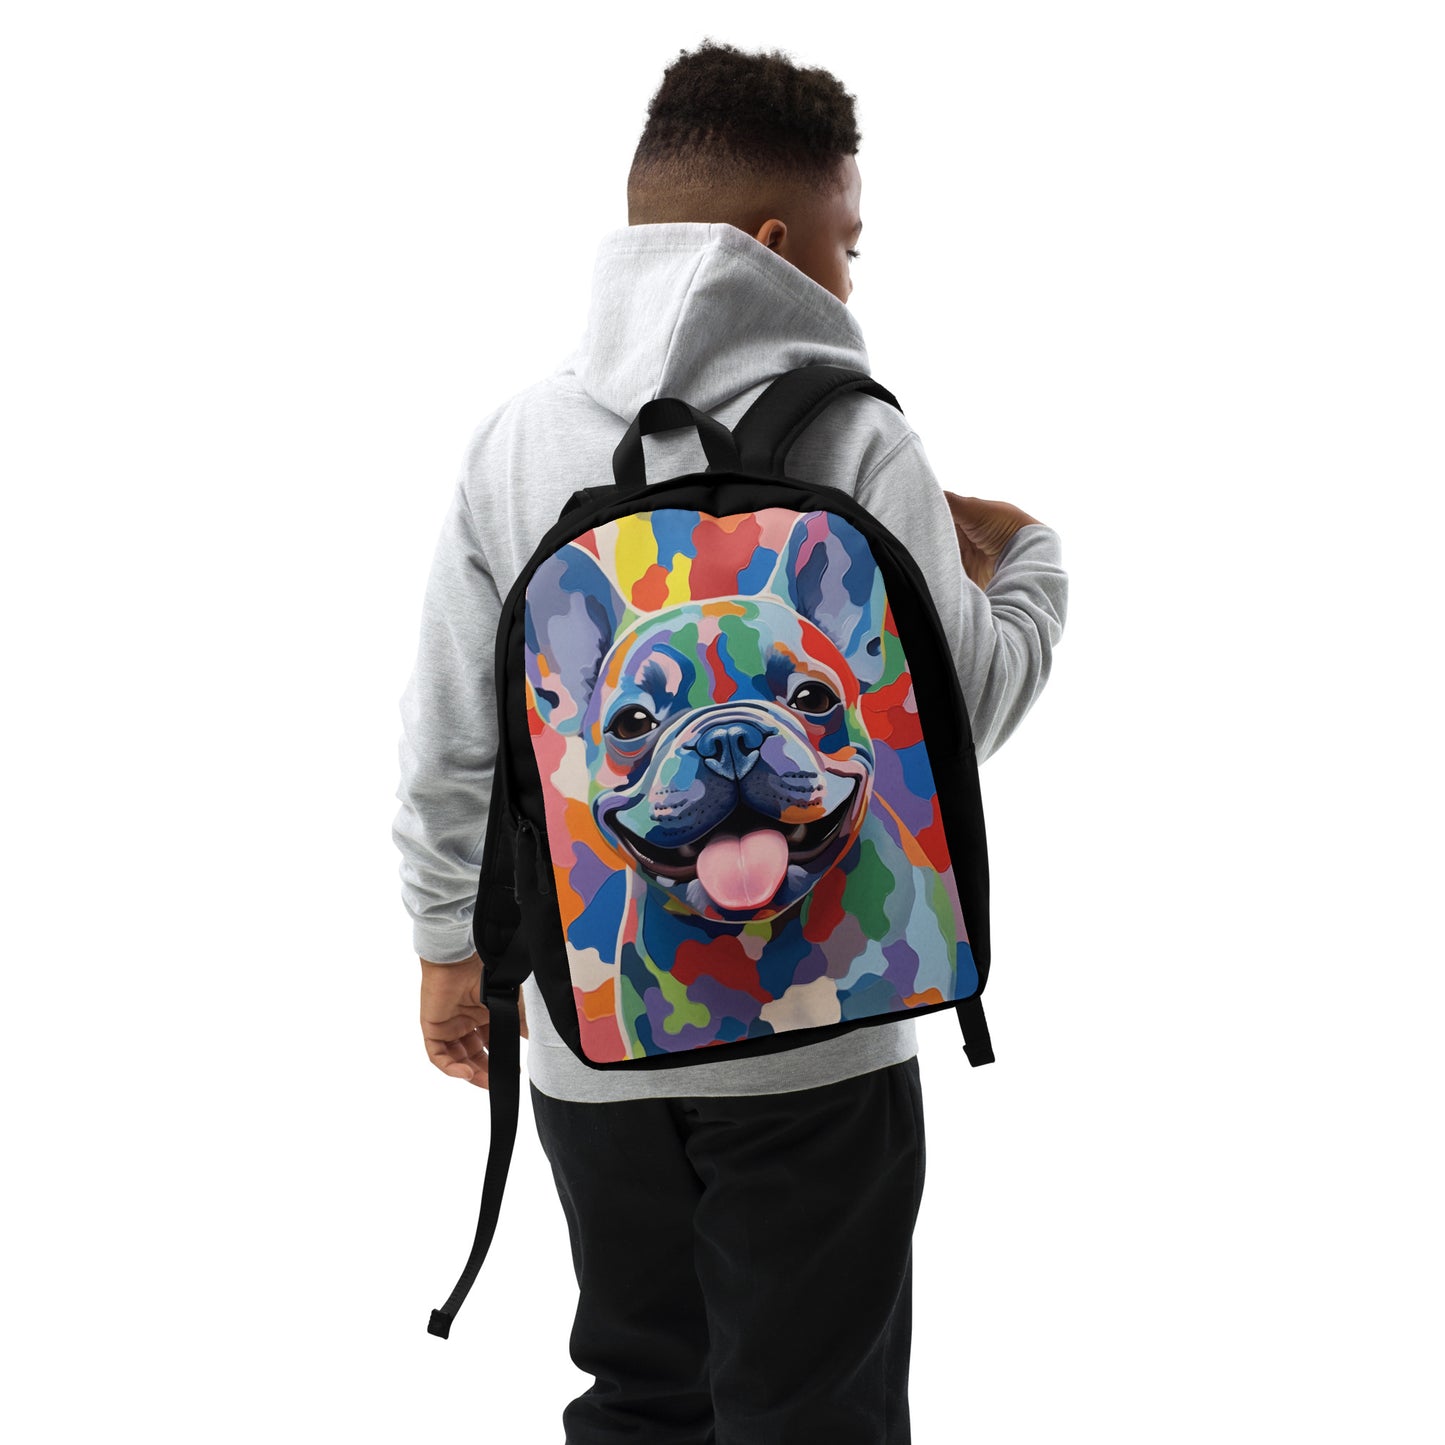 Spotty Fun Frenchie Backpack